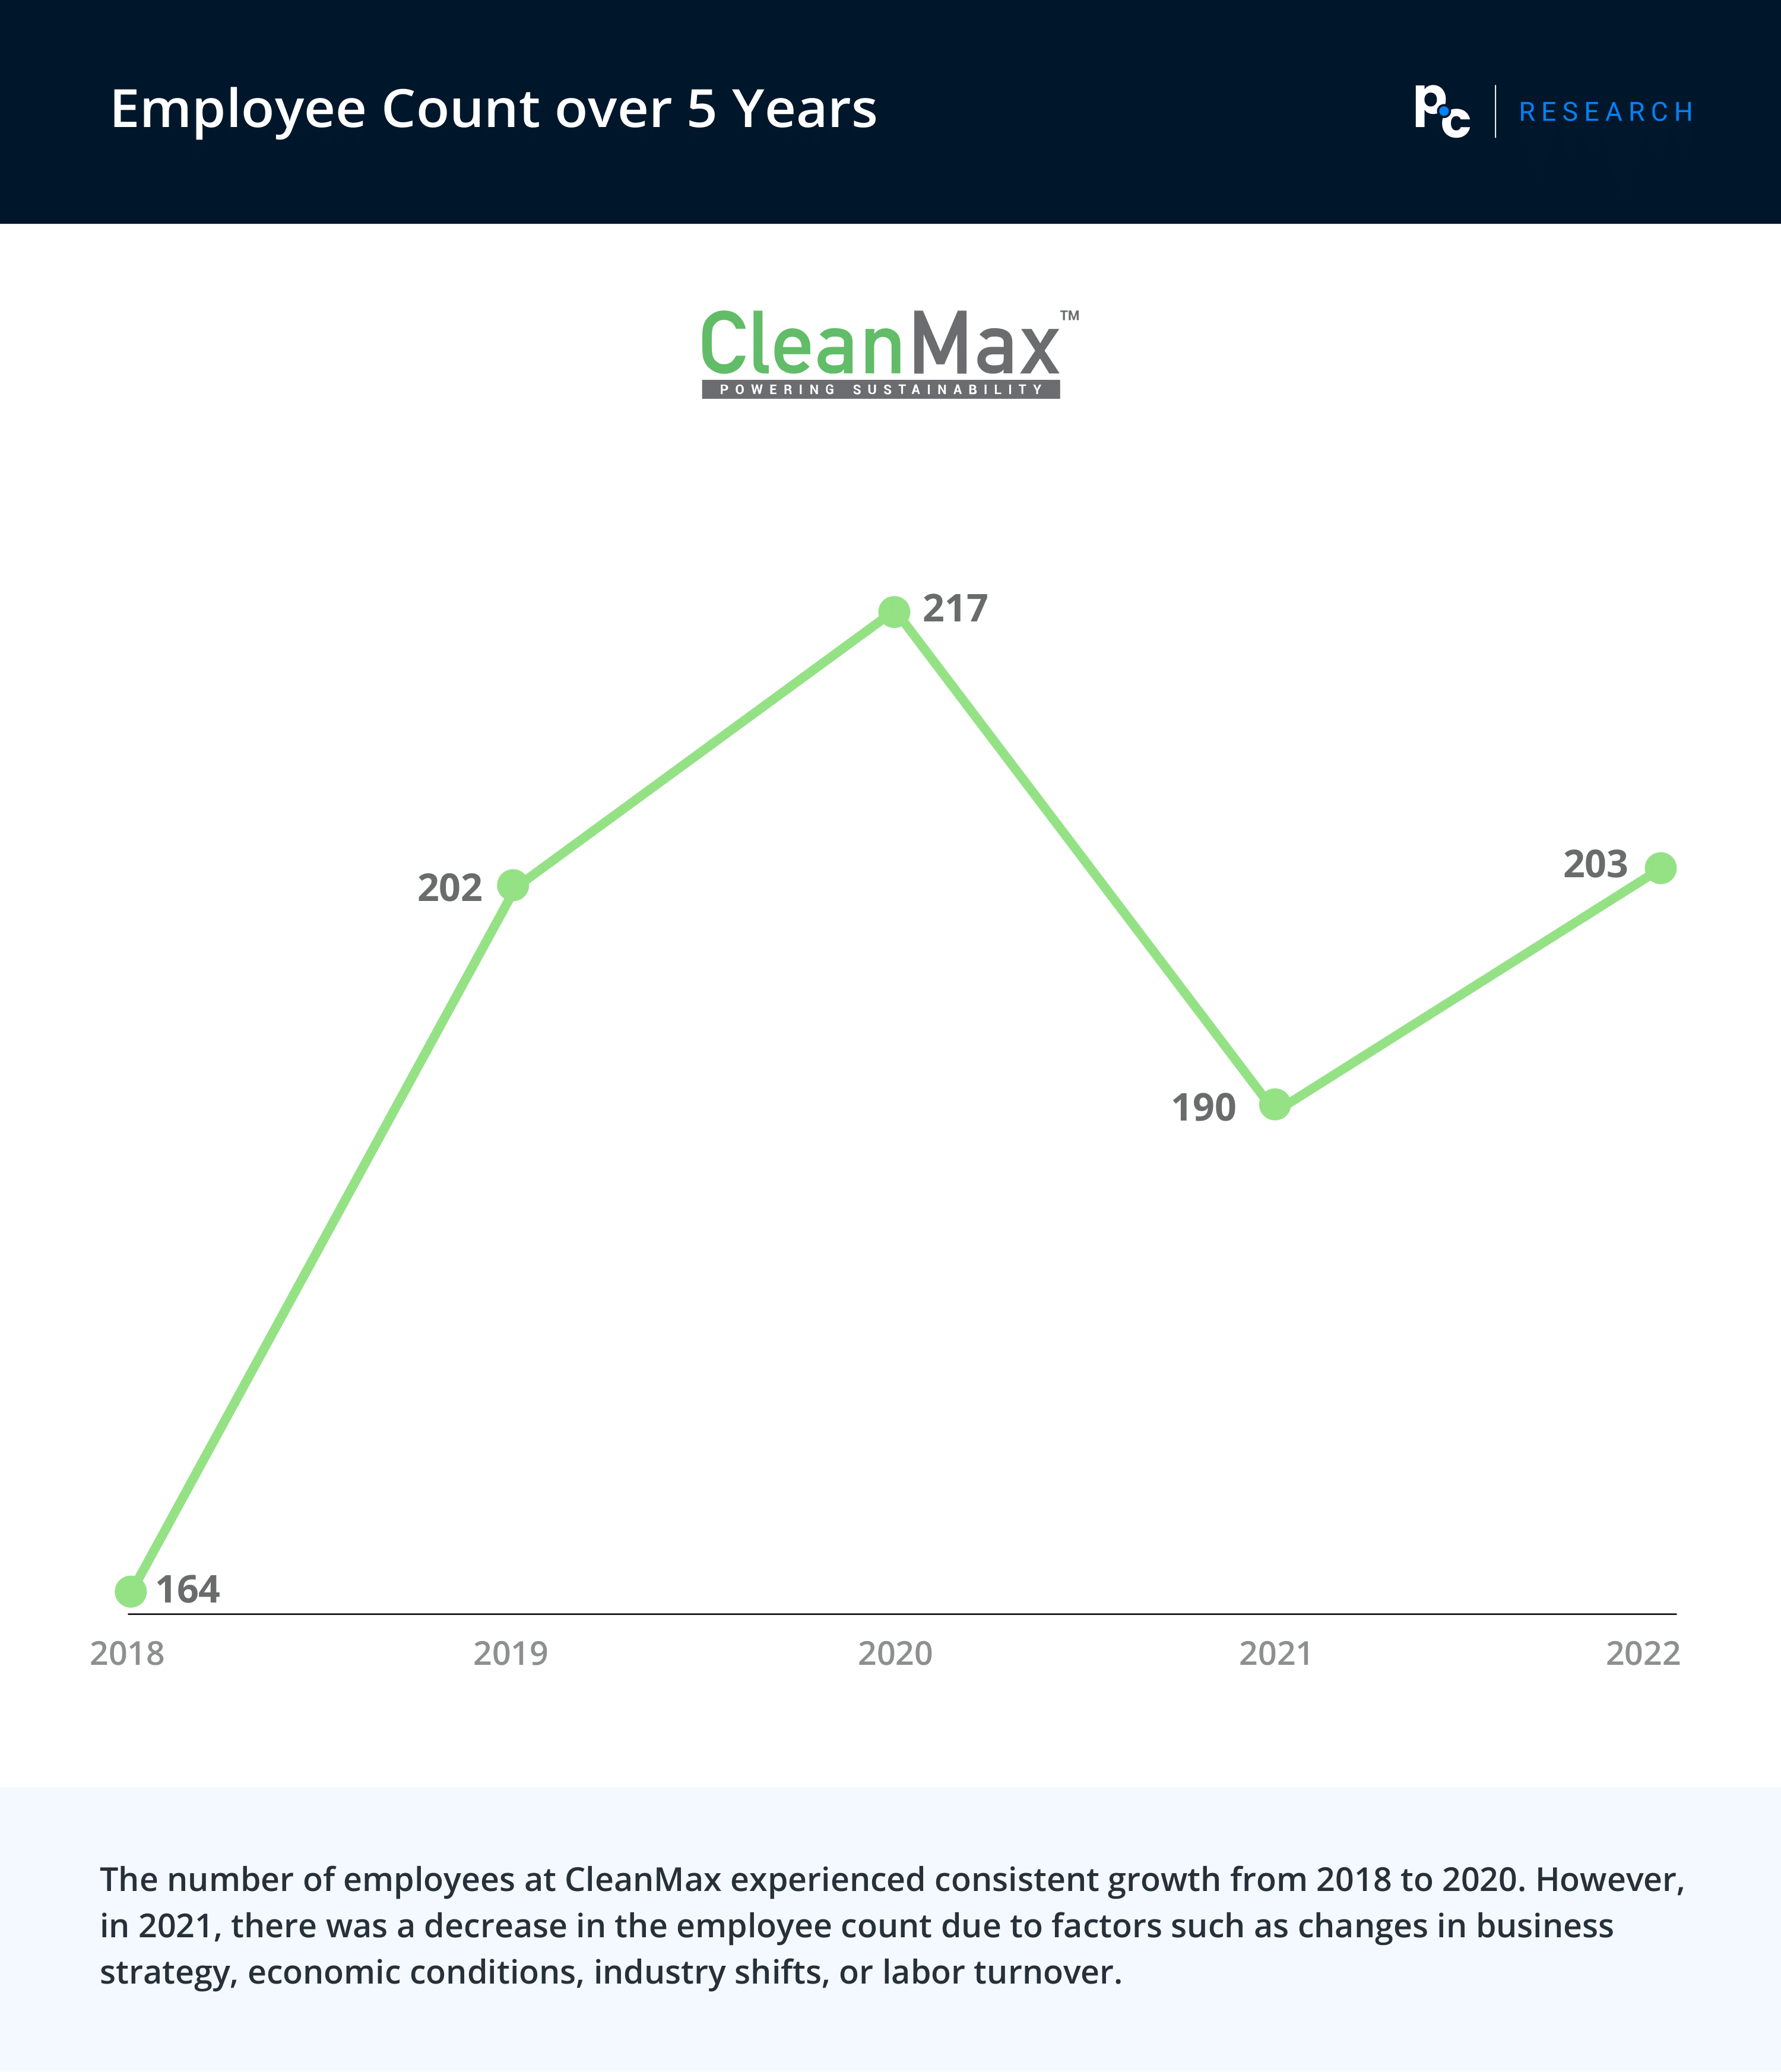 CleanMax: Employee Count over 5 Years.

The number of employees at CleanMax experienced consistent growth from 2018 to 2020. However, in 2021, there was a decrease in the employee count due to factors such as changes in business strategy, economic conditions, industry shifts, or labor turnover. 